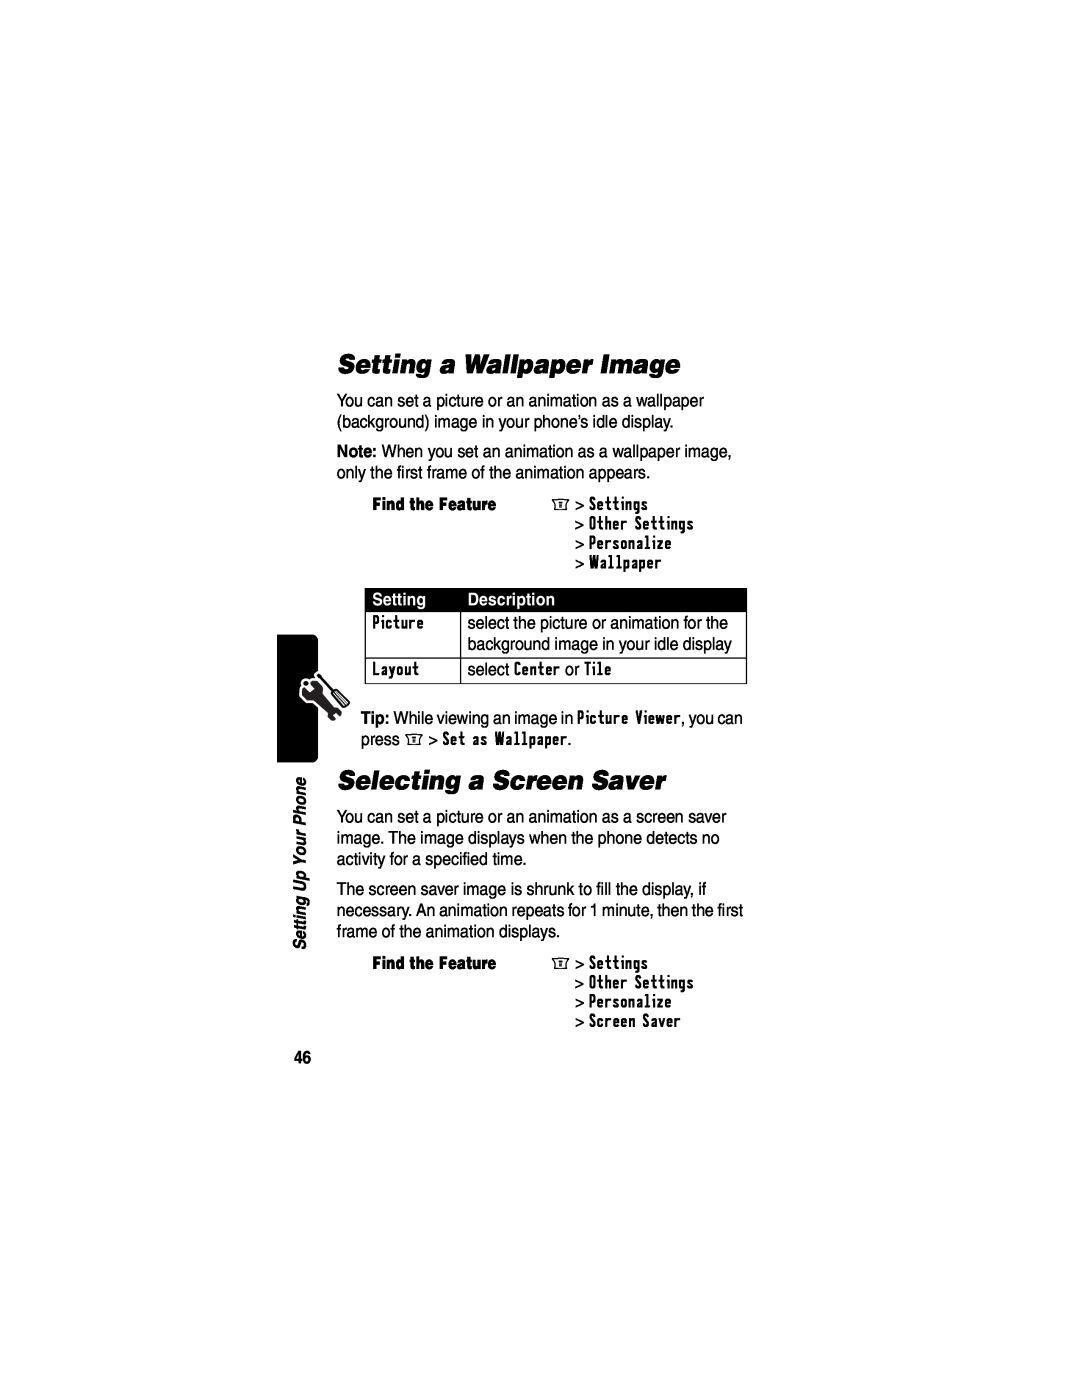 Motorola WIRELESS TELEPHONE manual Setting a Wallpaper Image, Selecting a Screen Saver, Description, Find the Feature 